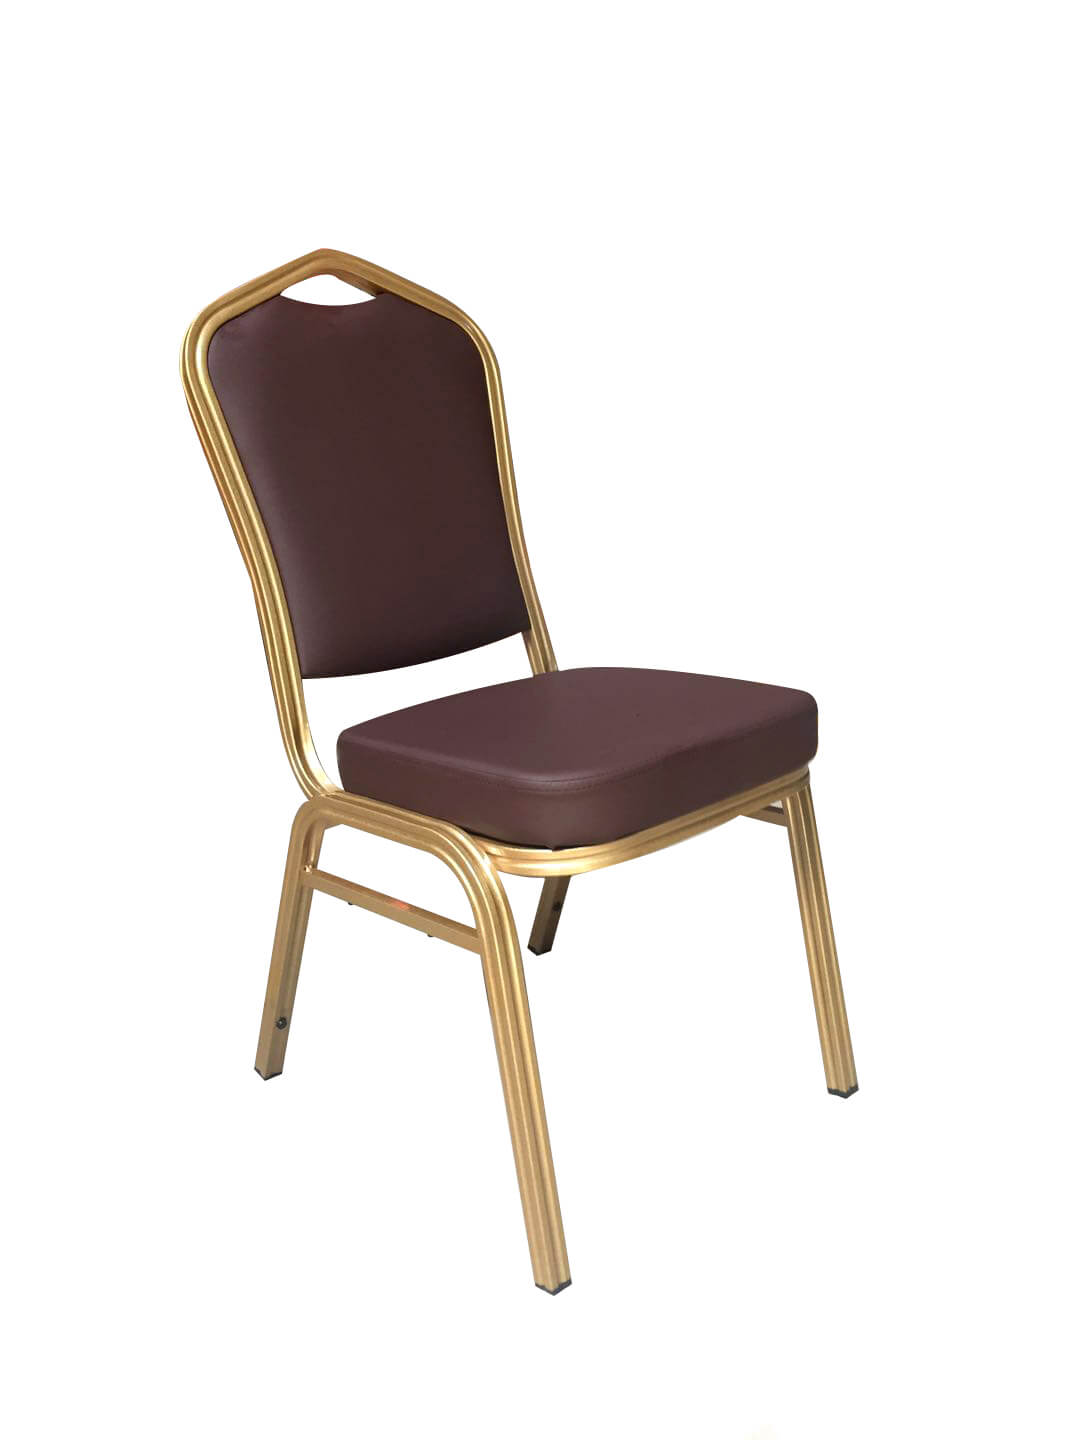 banquet chairs Wholesale and banquet Conference Chairs ...